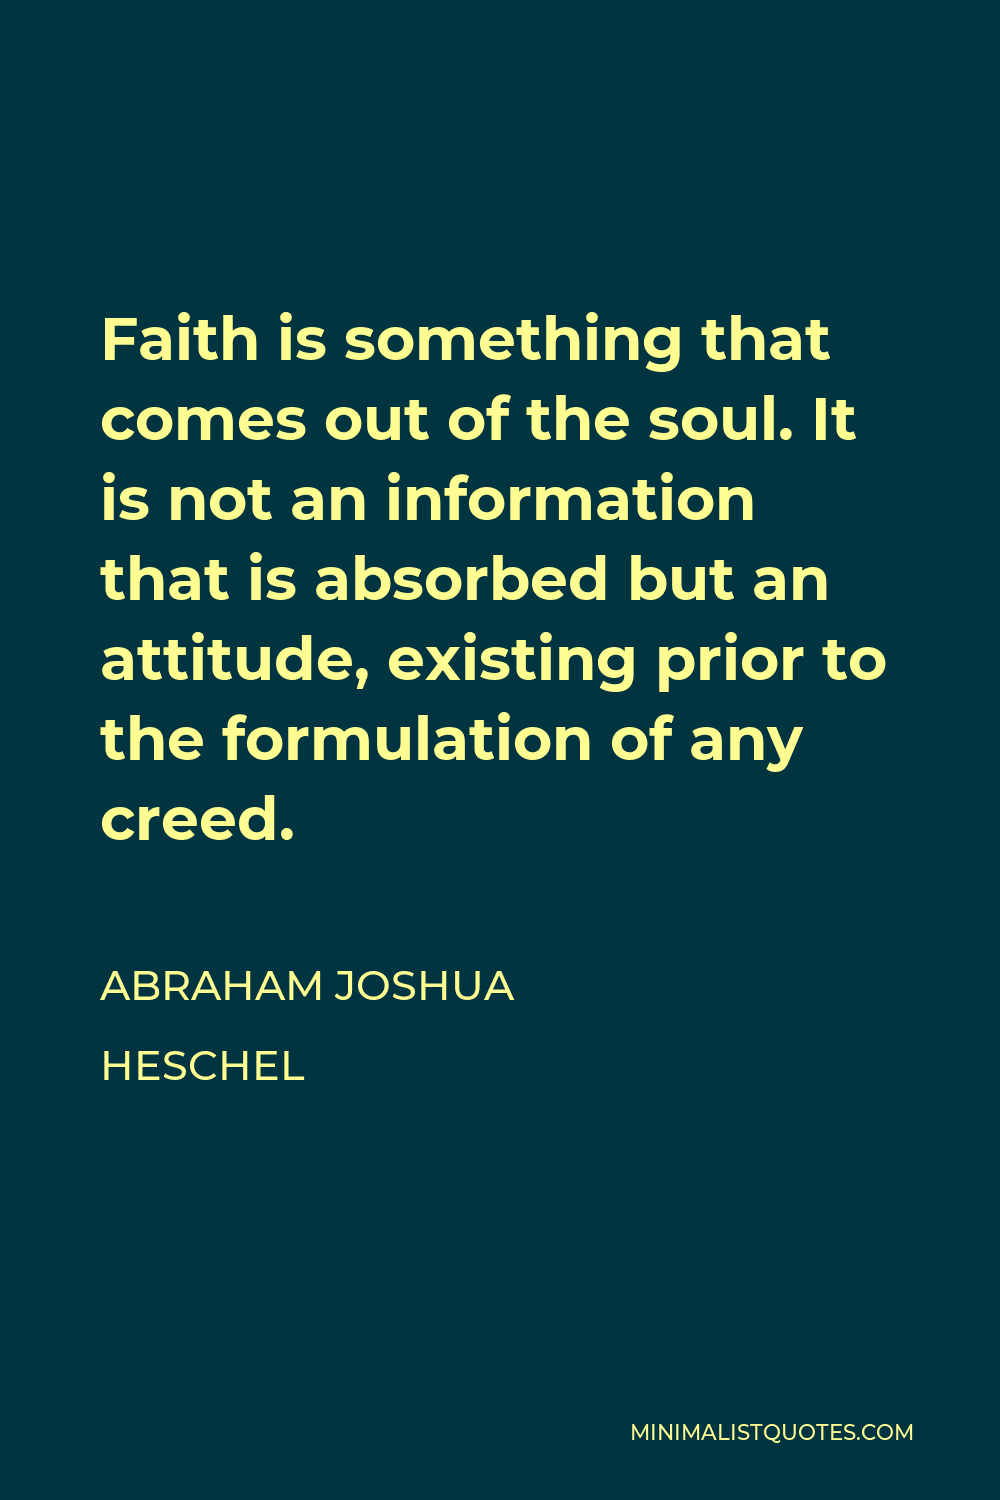 Abraham Joshua Heschel Quote - Faith is something that comes out of the soul. It is not an information that is absorbed but an attitude, existing prior to the formulation of any creed.